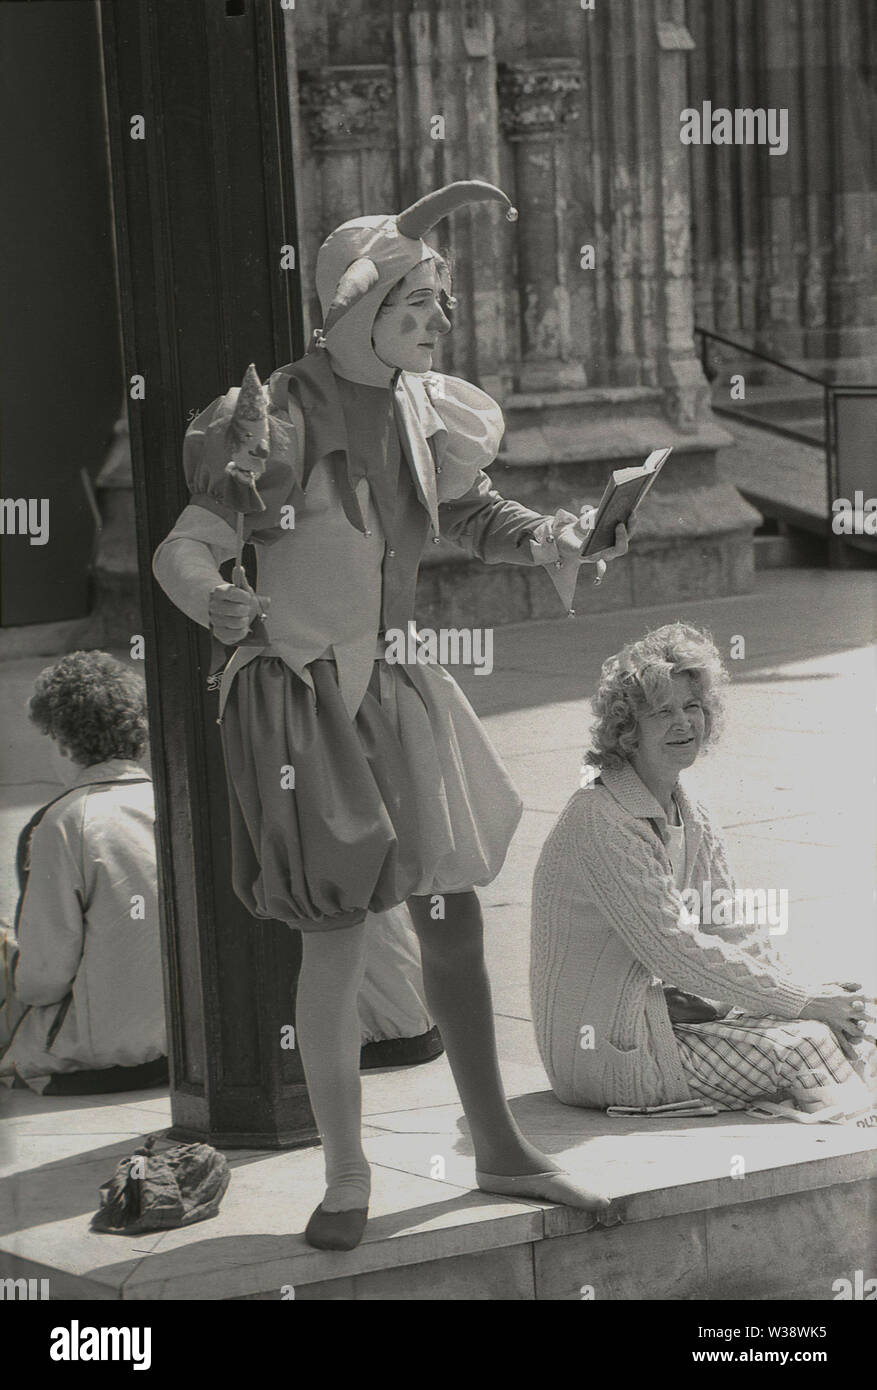 1980s, historical, a male jester, wearing traditional medieval costume, performing in the street, holding a marotte in one hand and reading a verse from a book, England, UK. Stock Photo